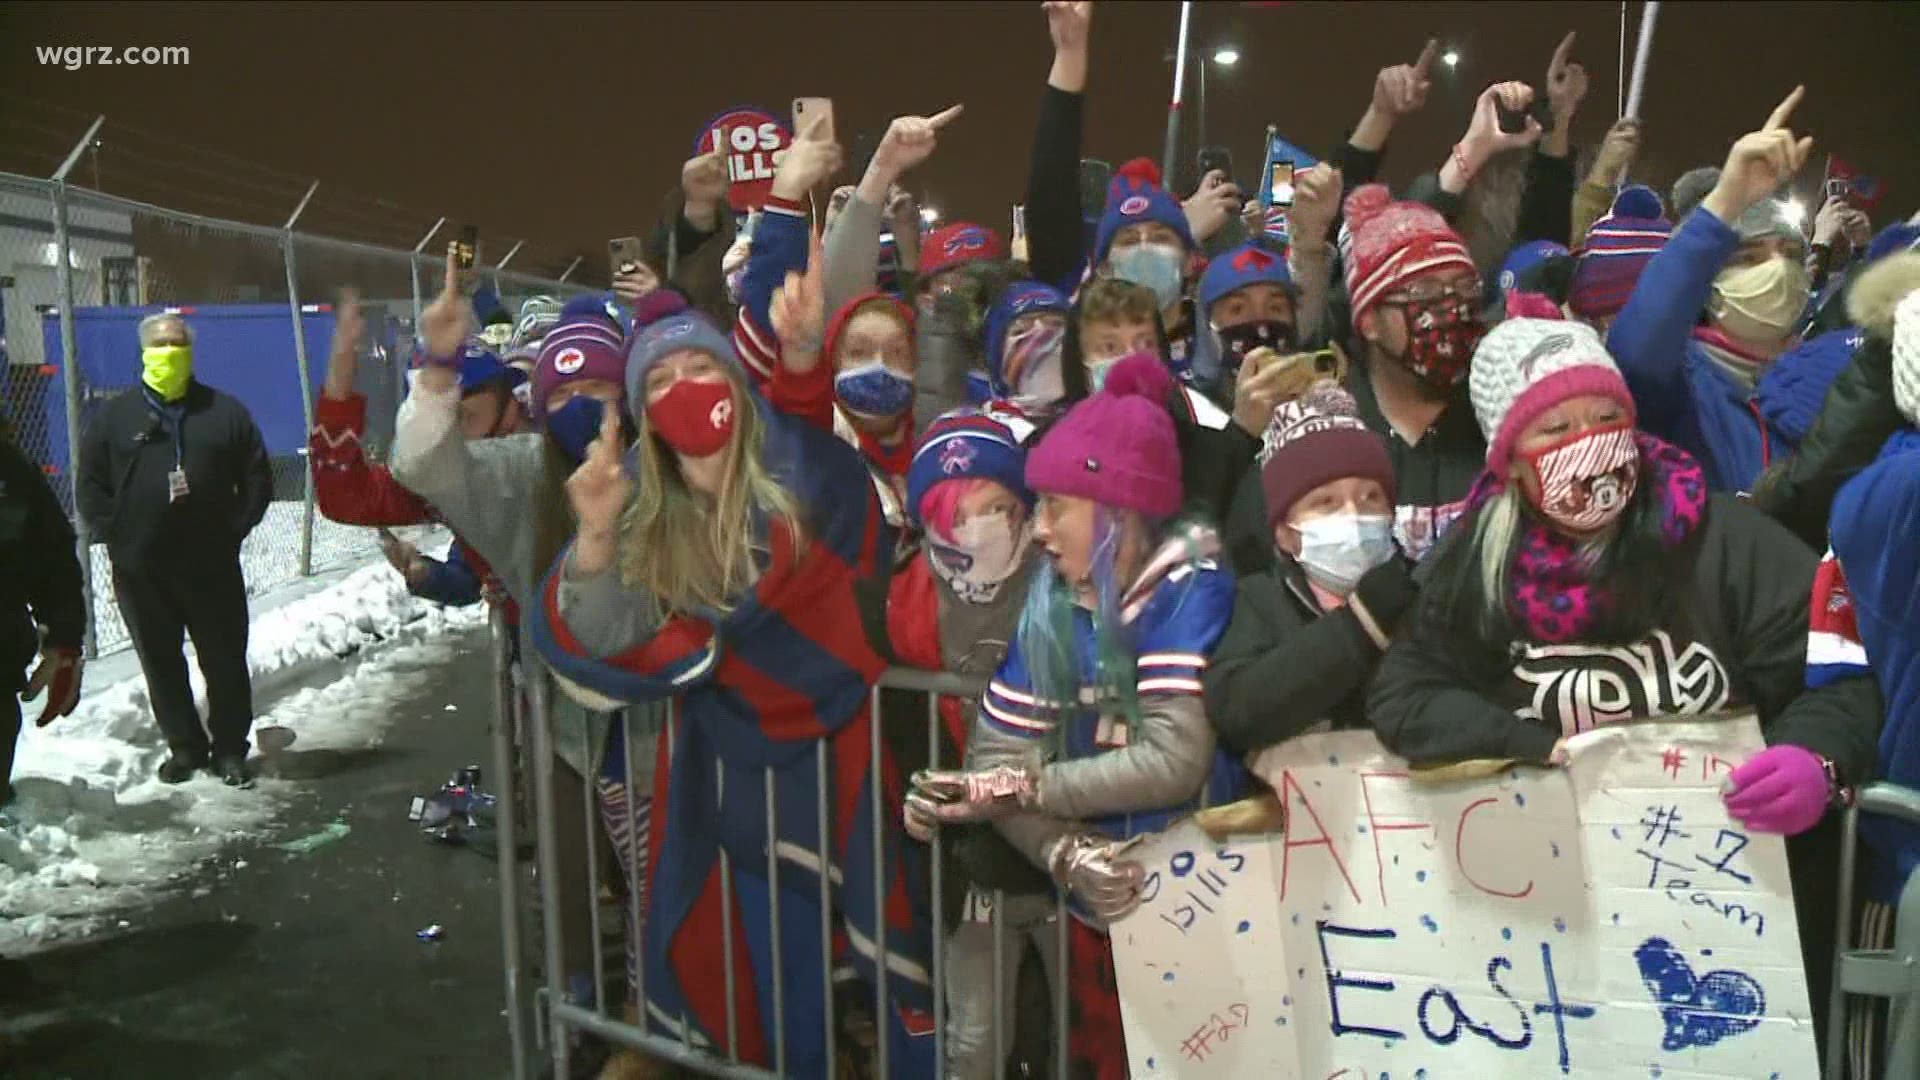 The Bills returned from Denver where they beat the Broncos 48-19, giving Buffalo its first AFC East title since 1995.